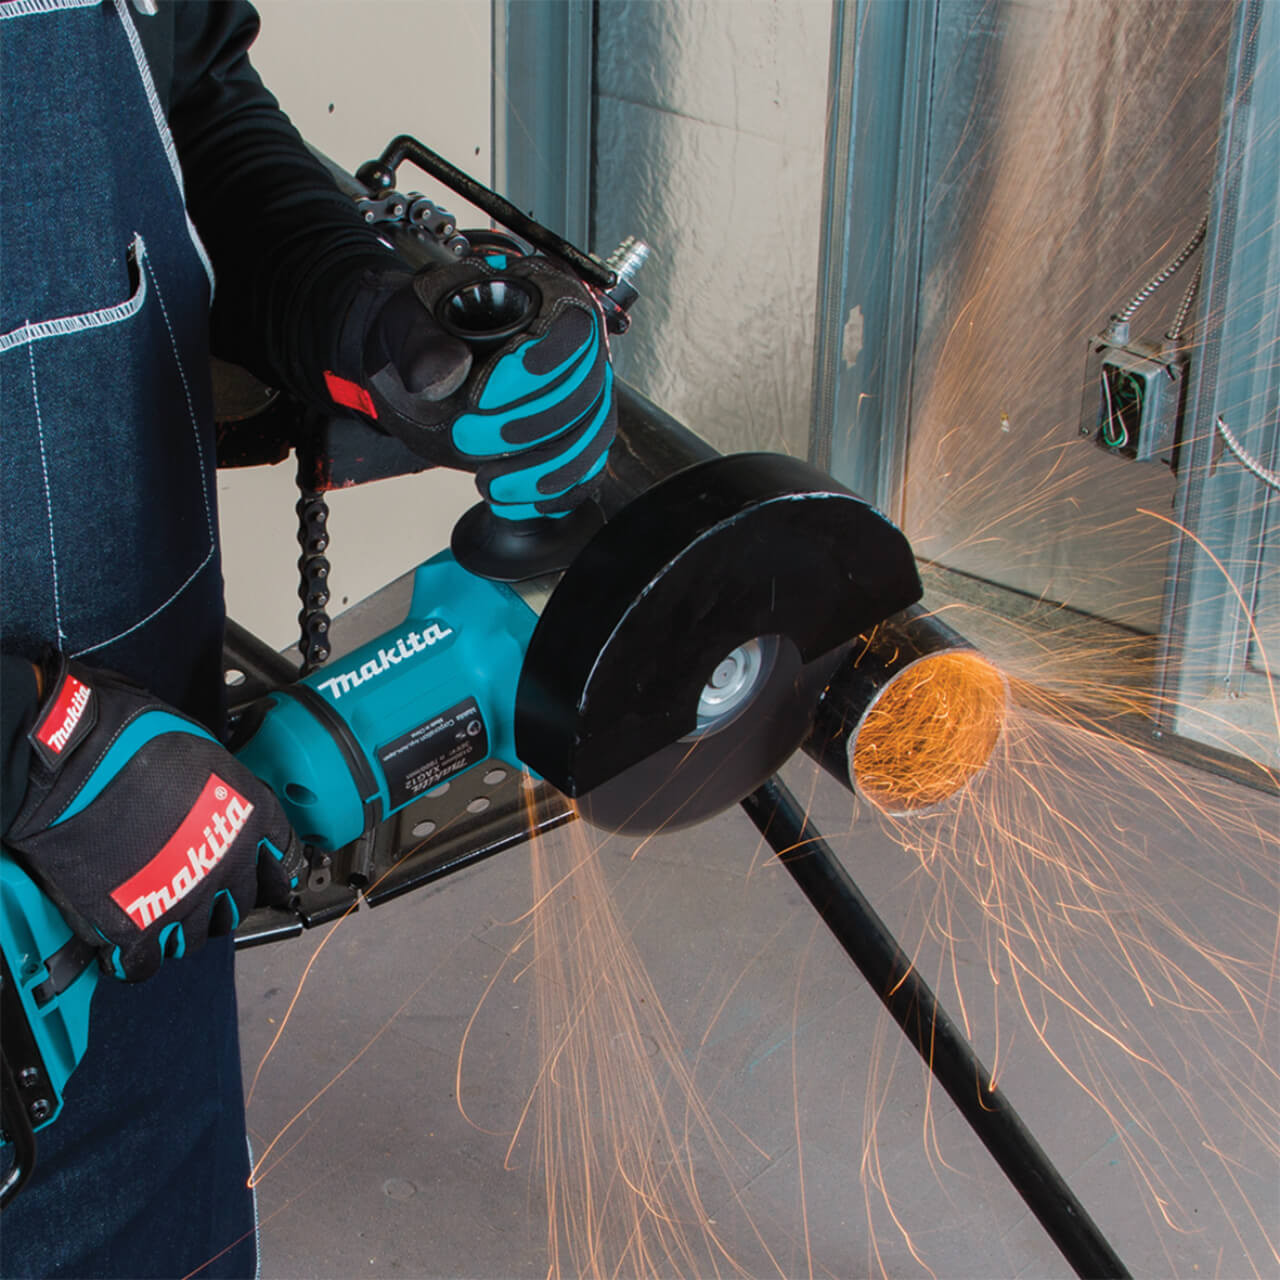 Makita 18Vx2 BRUSHLESS AWS 230mm Angle Grinder. Paddle Switch. Kick Back Detection. Electric Brake. Anti-Vib Handle & Carry Case - Tool Only